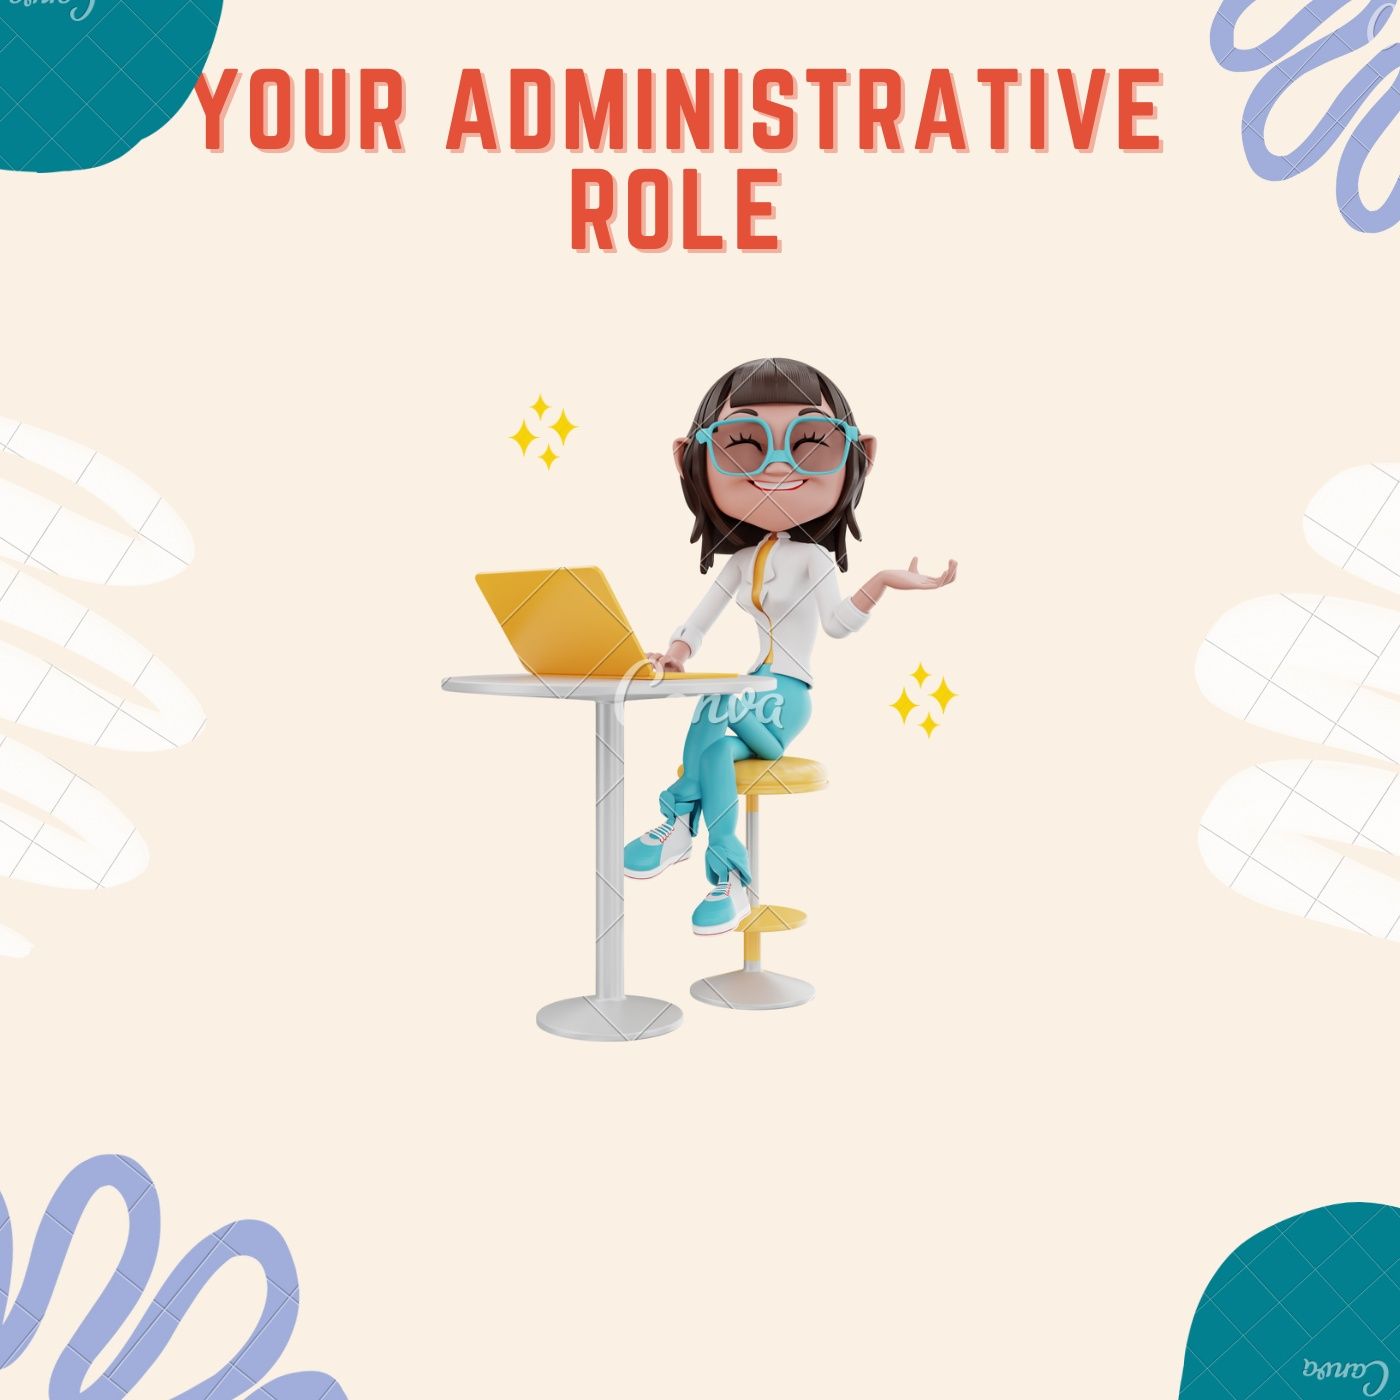 Your Administrative Role